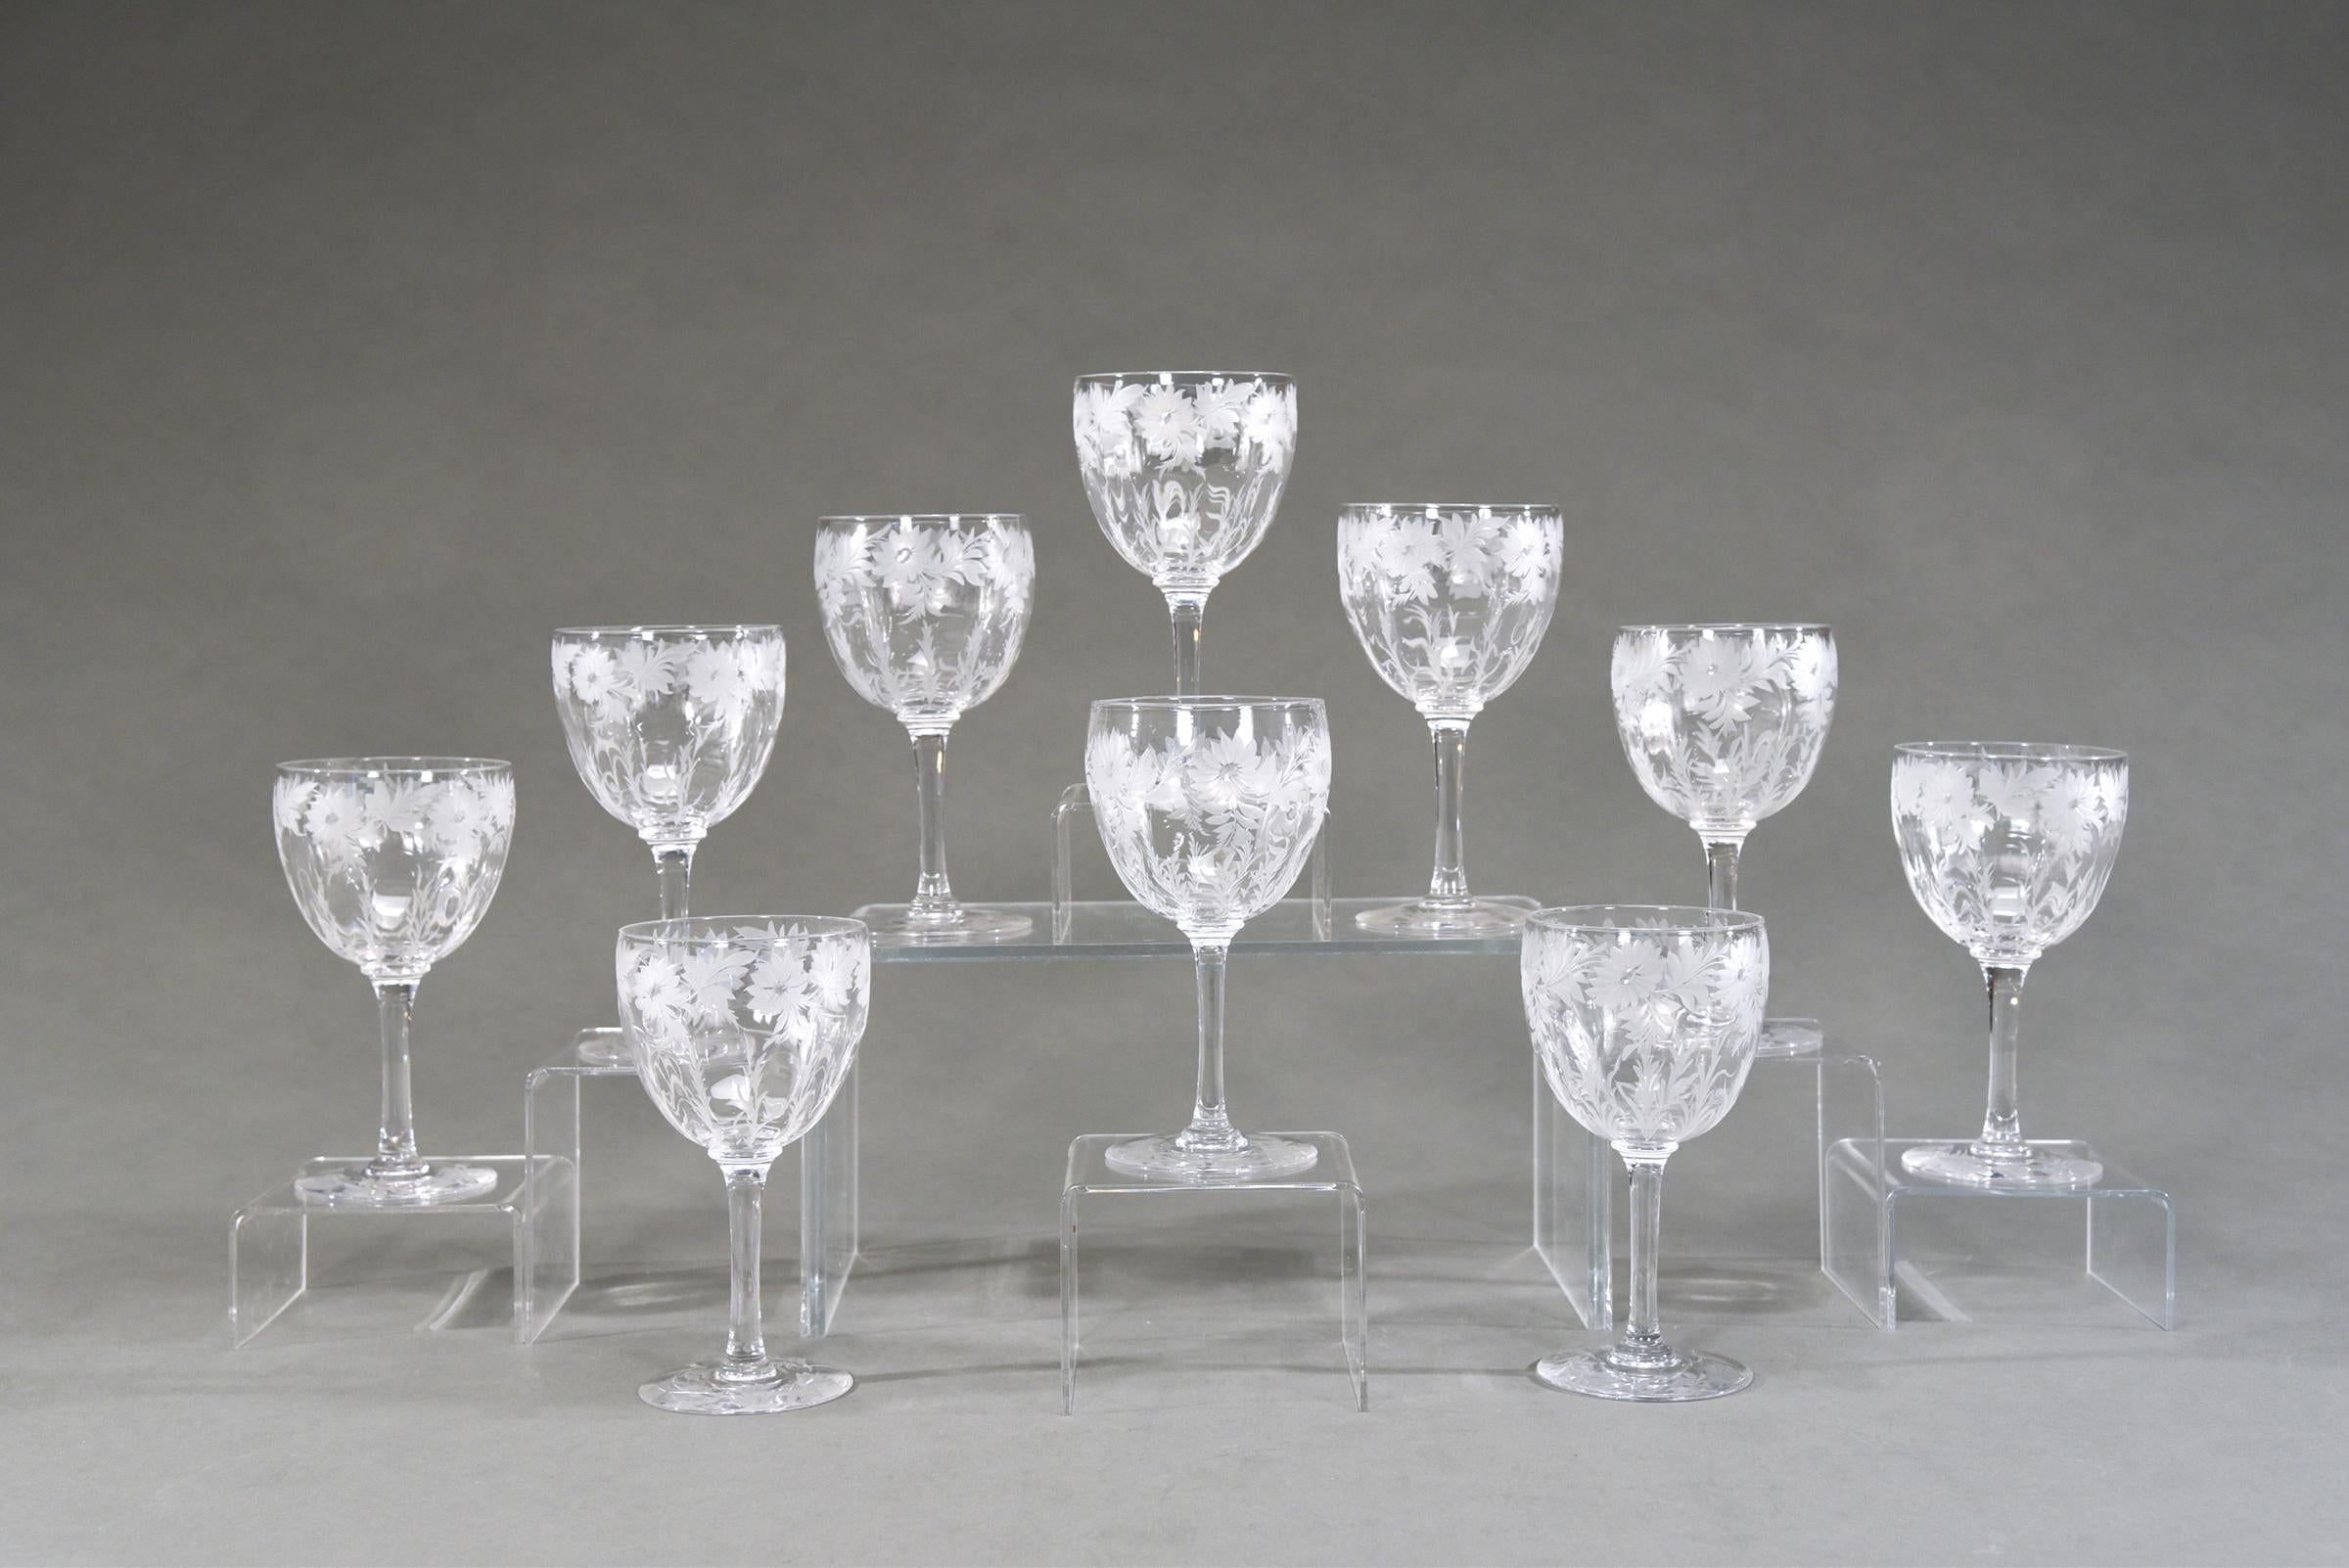 This set of 12 signed Libbey handblown goblets depict an iconic Arts and Crafts pattern of wheel cut flowers alternating with leaves along the rim. The engraving remains frosted which gives them a wonderful contrast to the clear crystal bowl. The